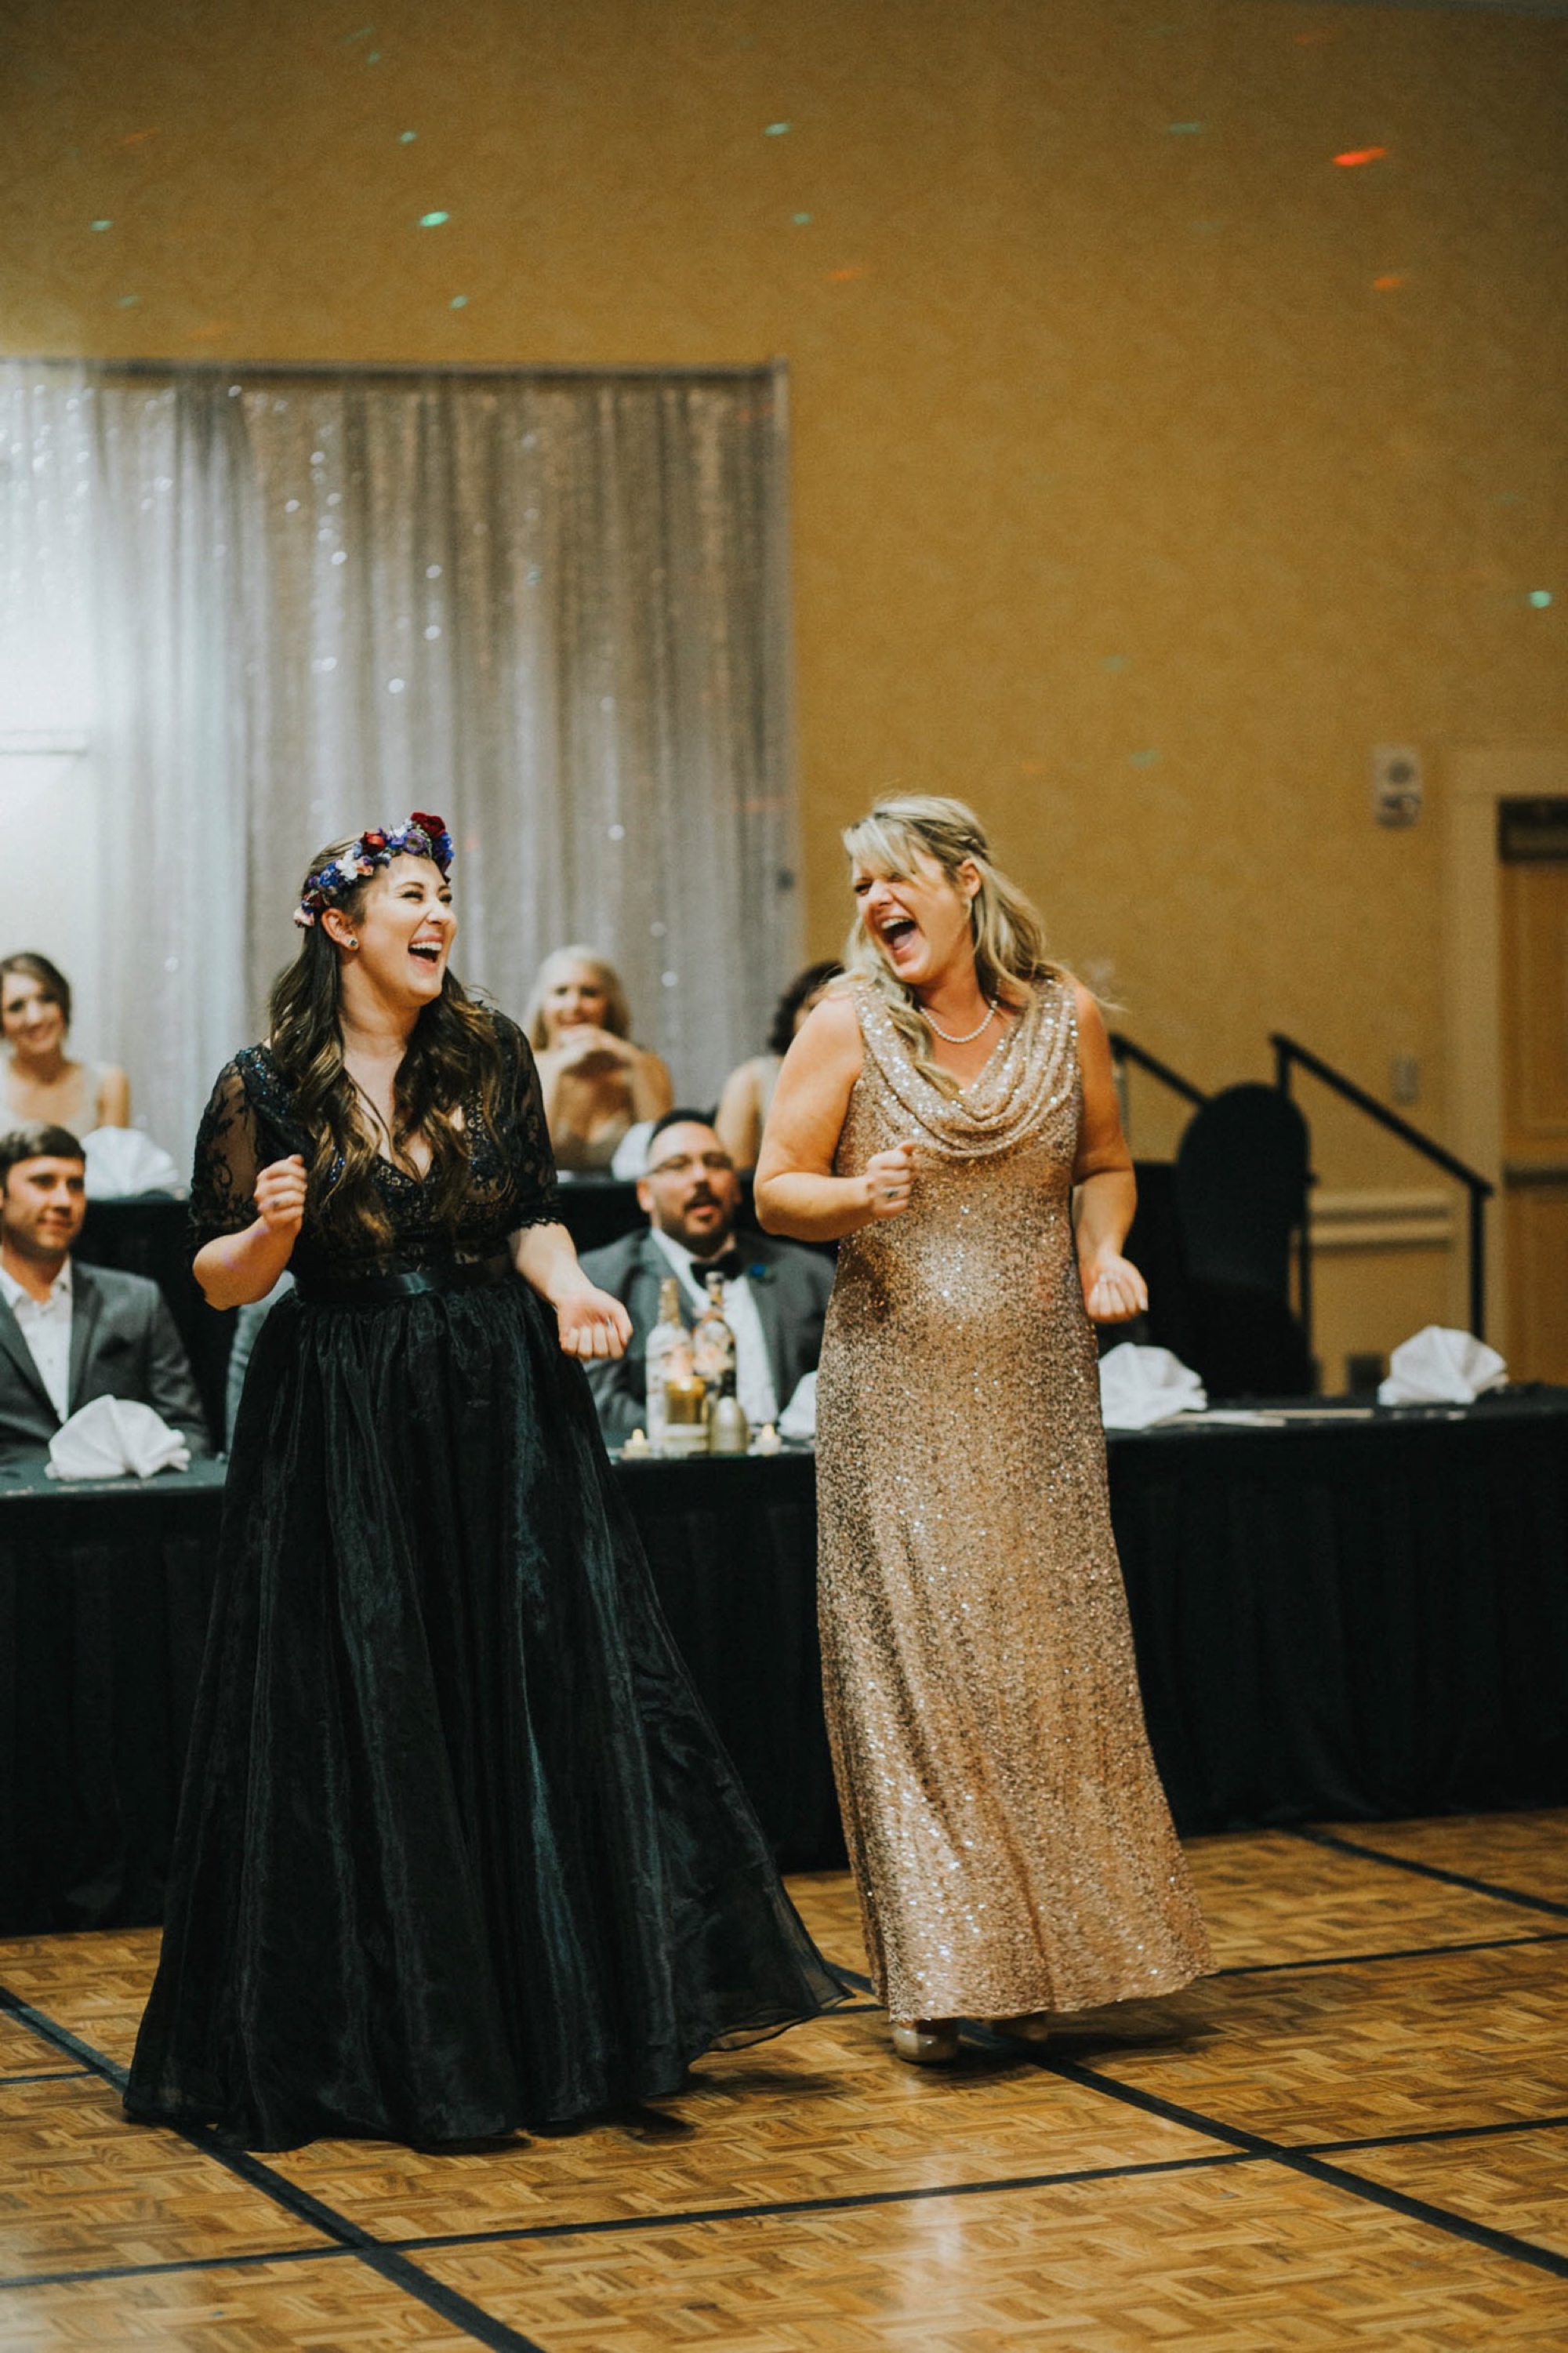  Kymbrye and Chris had the most magical New Years Eve wedding in Albuquerque, New Mexico. Every detail of their fabulous New Years Eve wedding was so beautiful and meaningful. They held their ceremony at the UNM Alumni Memorial Chapel followed by the